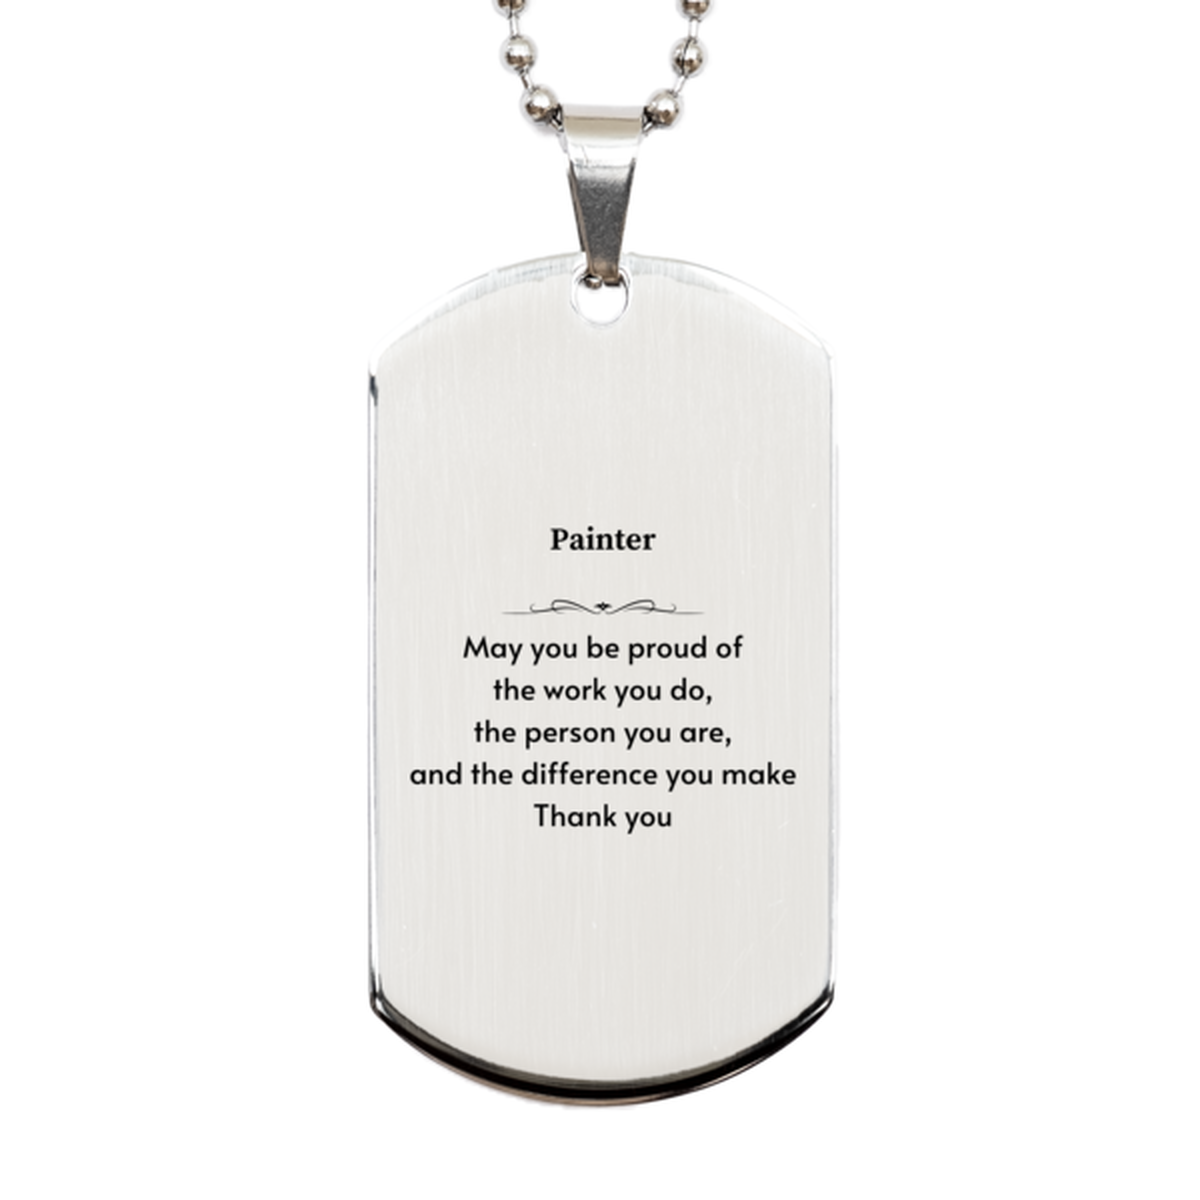 Heartwarming Silver Dog Tag Retirement Coworkers Gifts for Painter, Painter May You be proud of the work you do, the person you are Gifts for Boss Men Women Friends